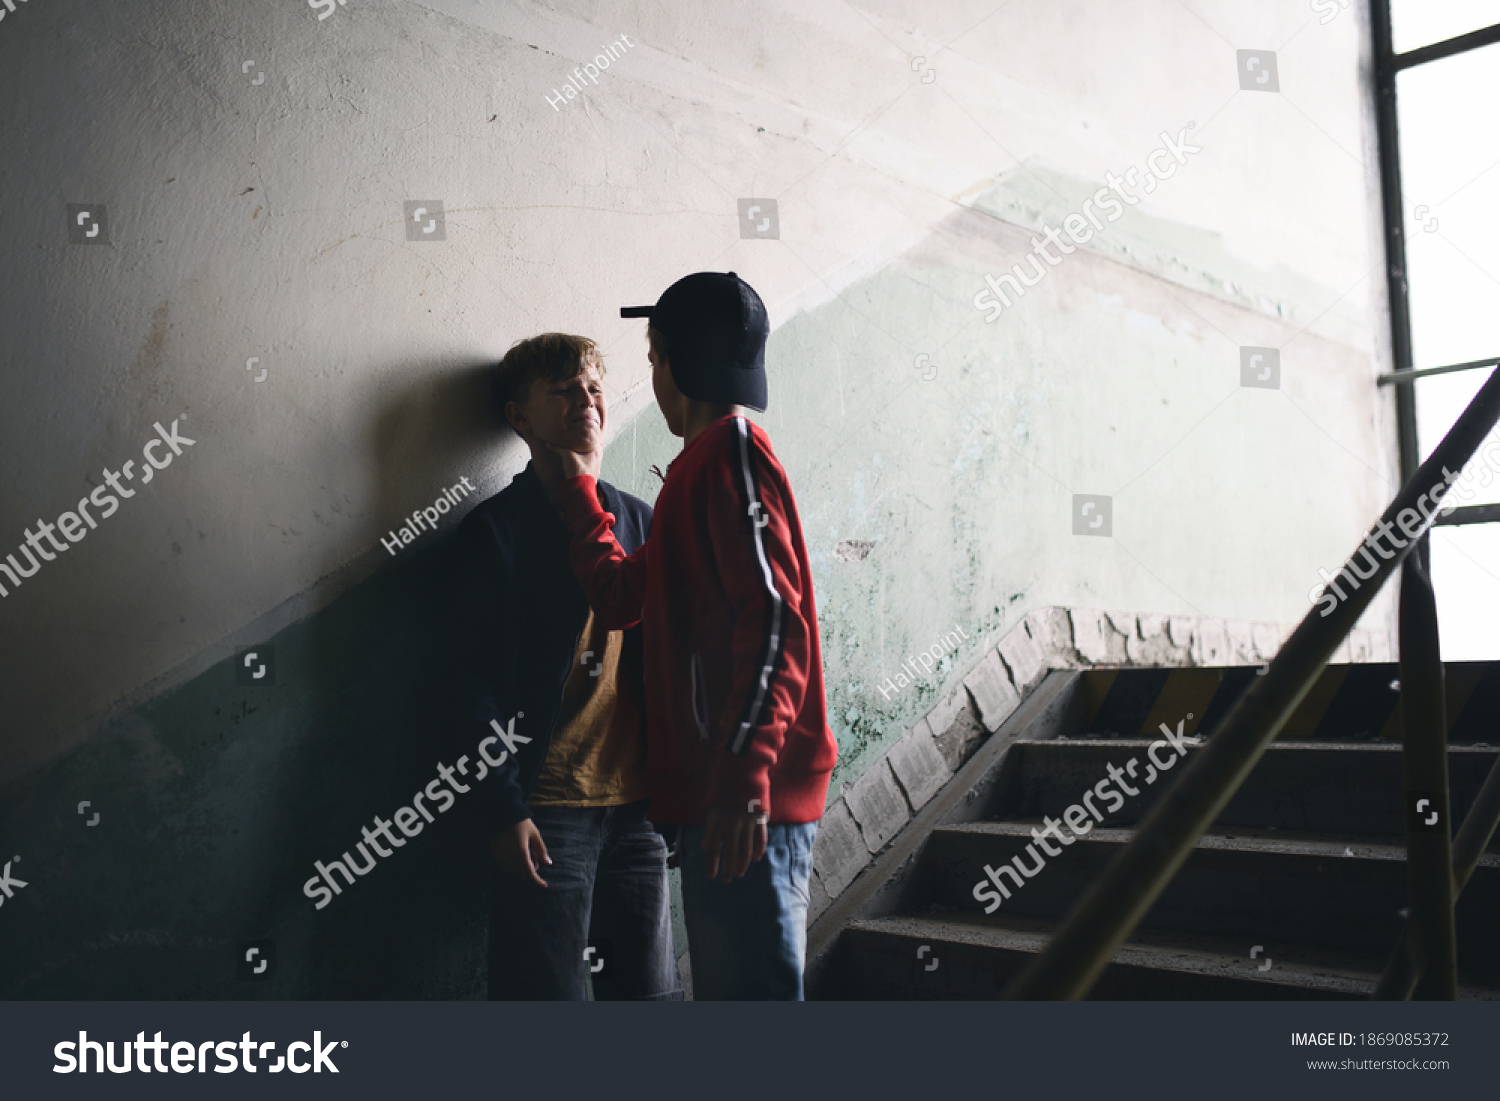 2,636 Criminal youth violence Images, Stock Photos & Vectors | Shutterstock